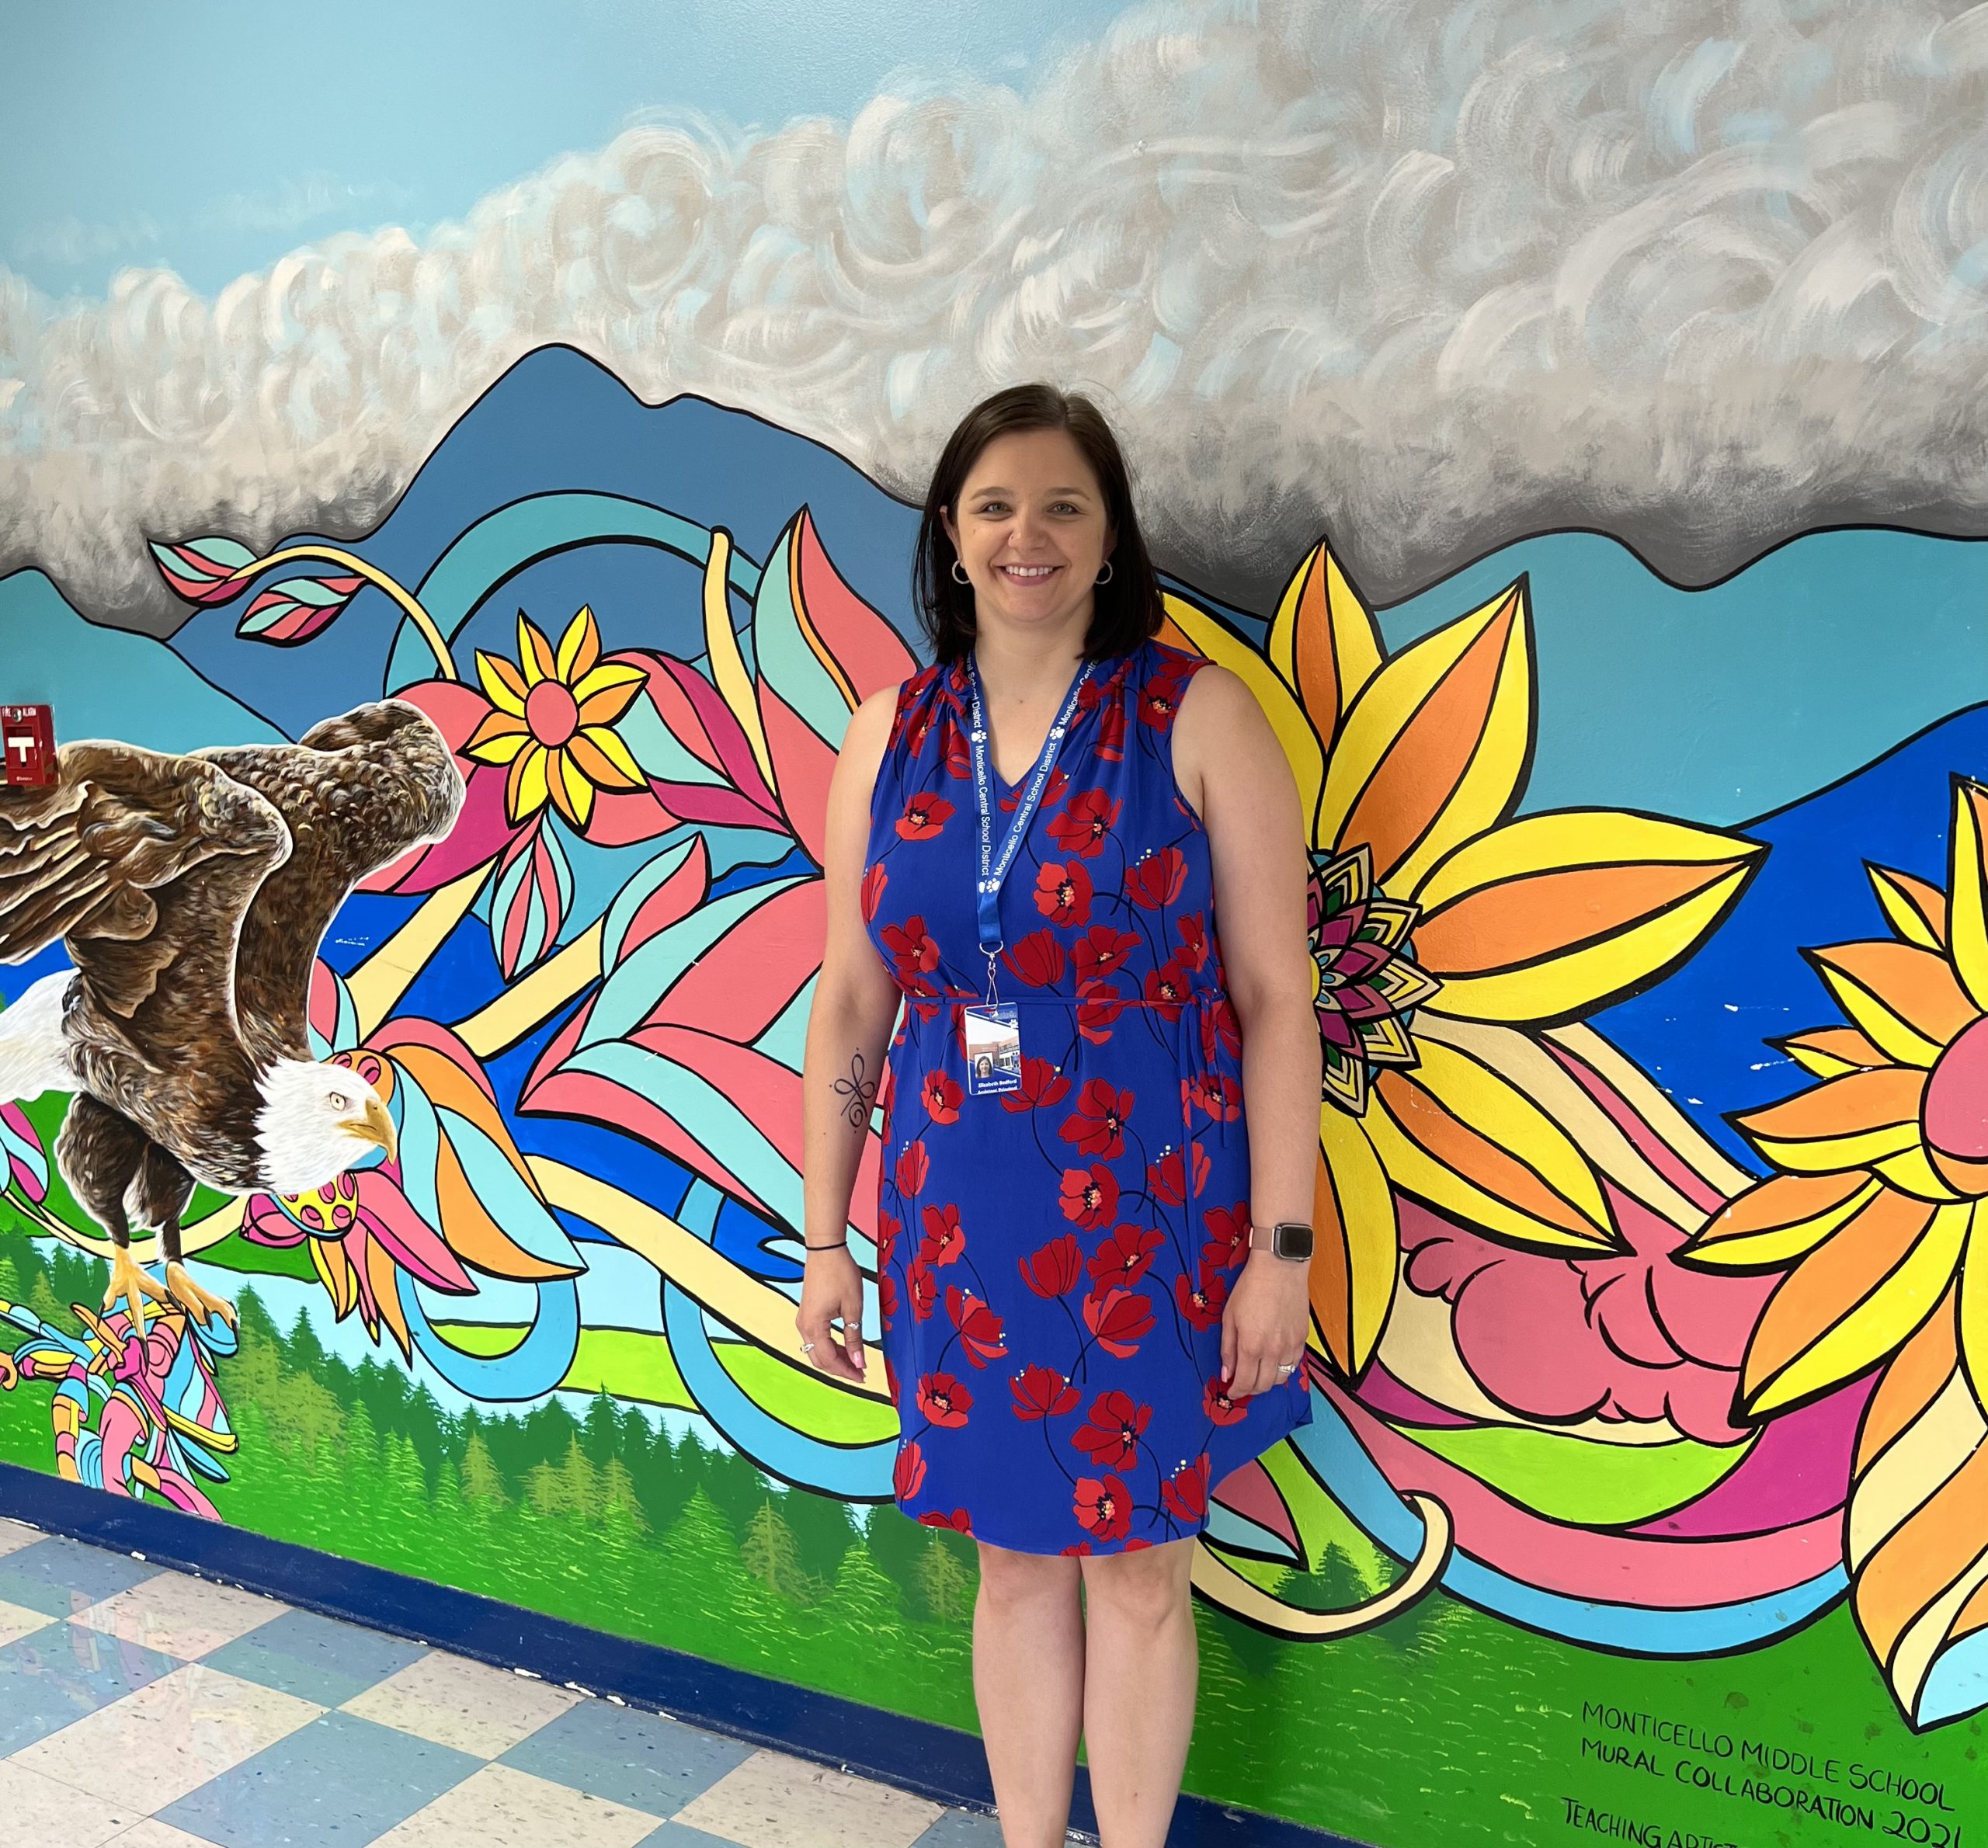 Elizabeth Bedford is posing in front of a mural at the Robert J. Kaiser Middle School